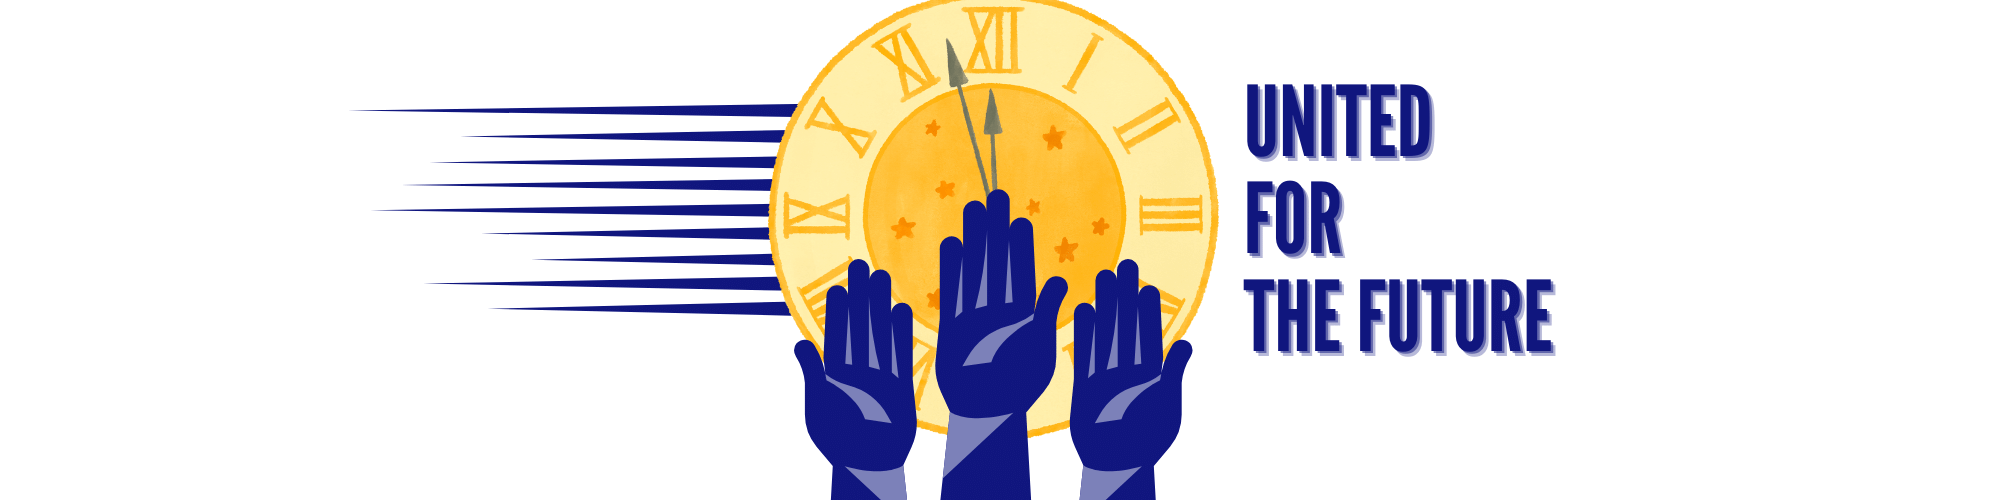 United for the Future logo of raised hands over a clock